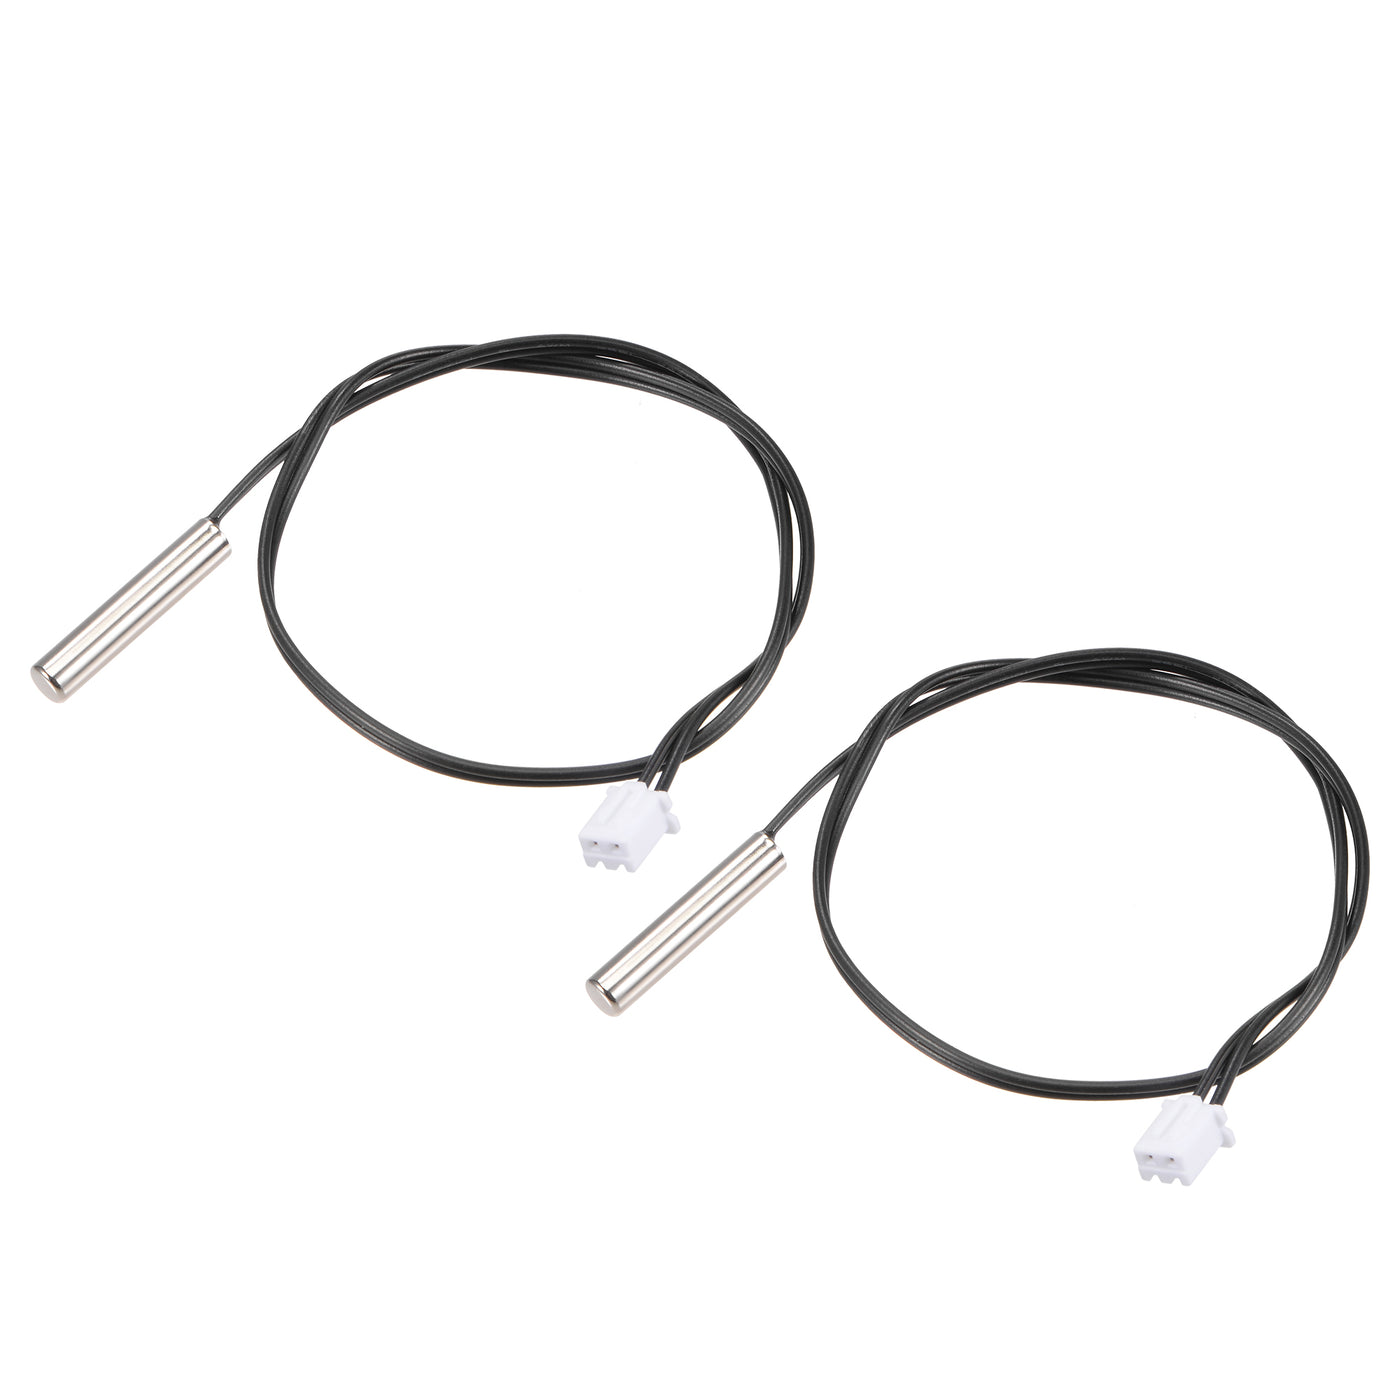 uxcell Uxcell 2pcs 15K Temperature Sensor Probe, Stainless Steel NTC Thermal Sensor Probe 30cm Digital Thermometer Extension Cable